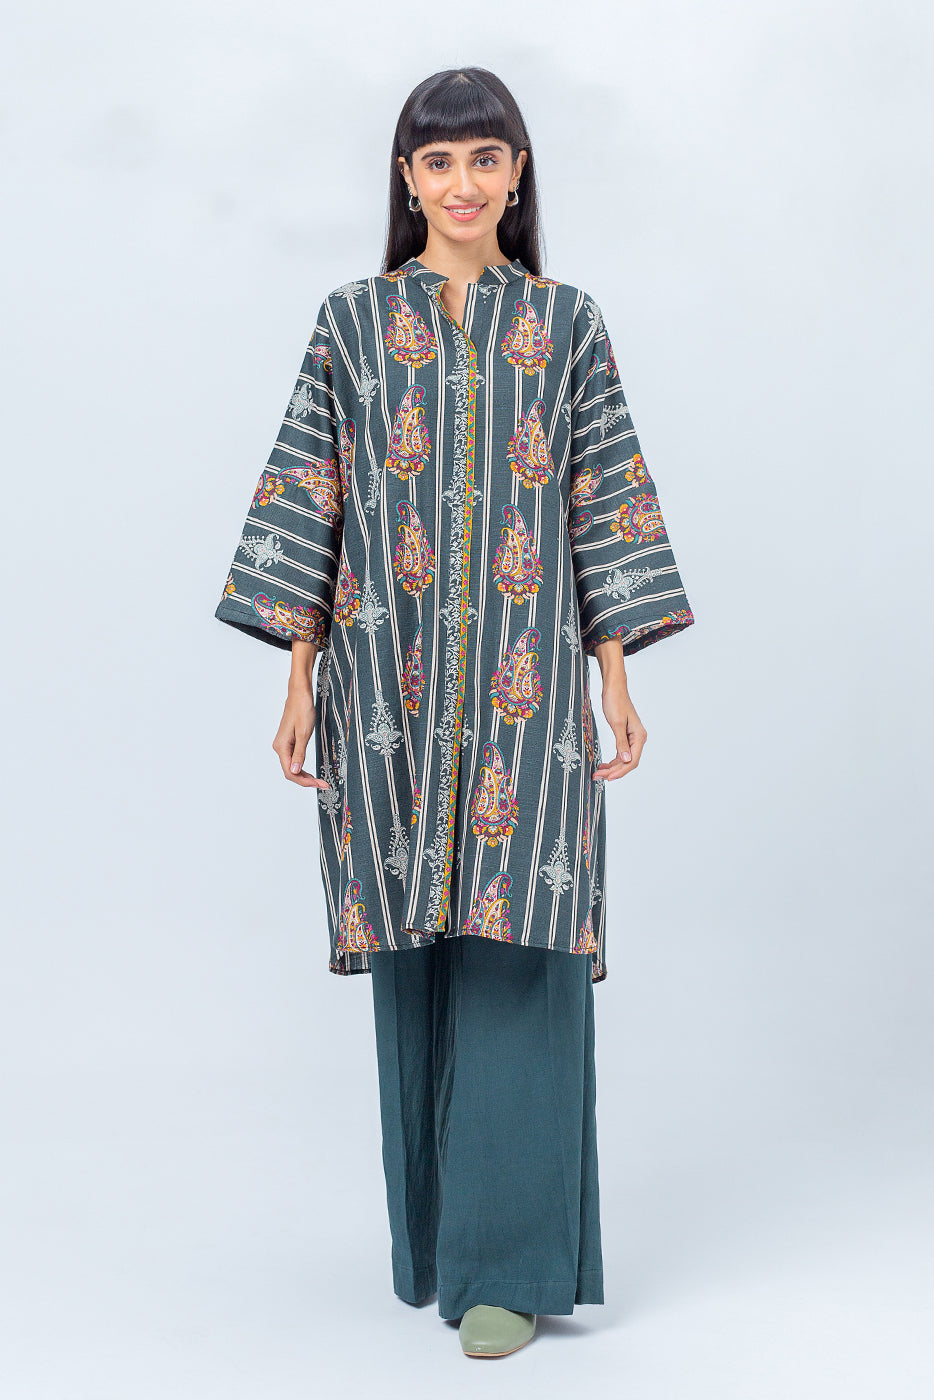 2 PIECE - PRINTED KHADDAR SUIT - TRADITIONAL CHARM (UNSTITCHED) - BEECHTREE